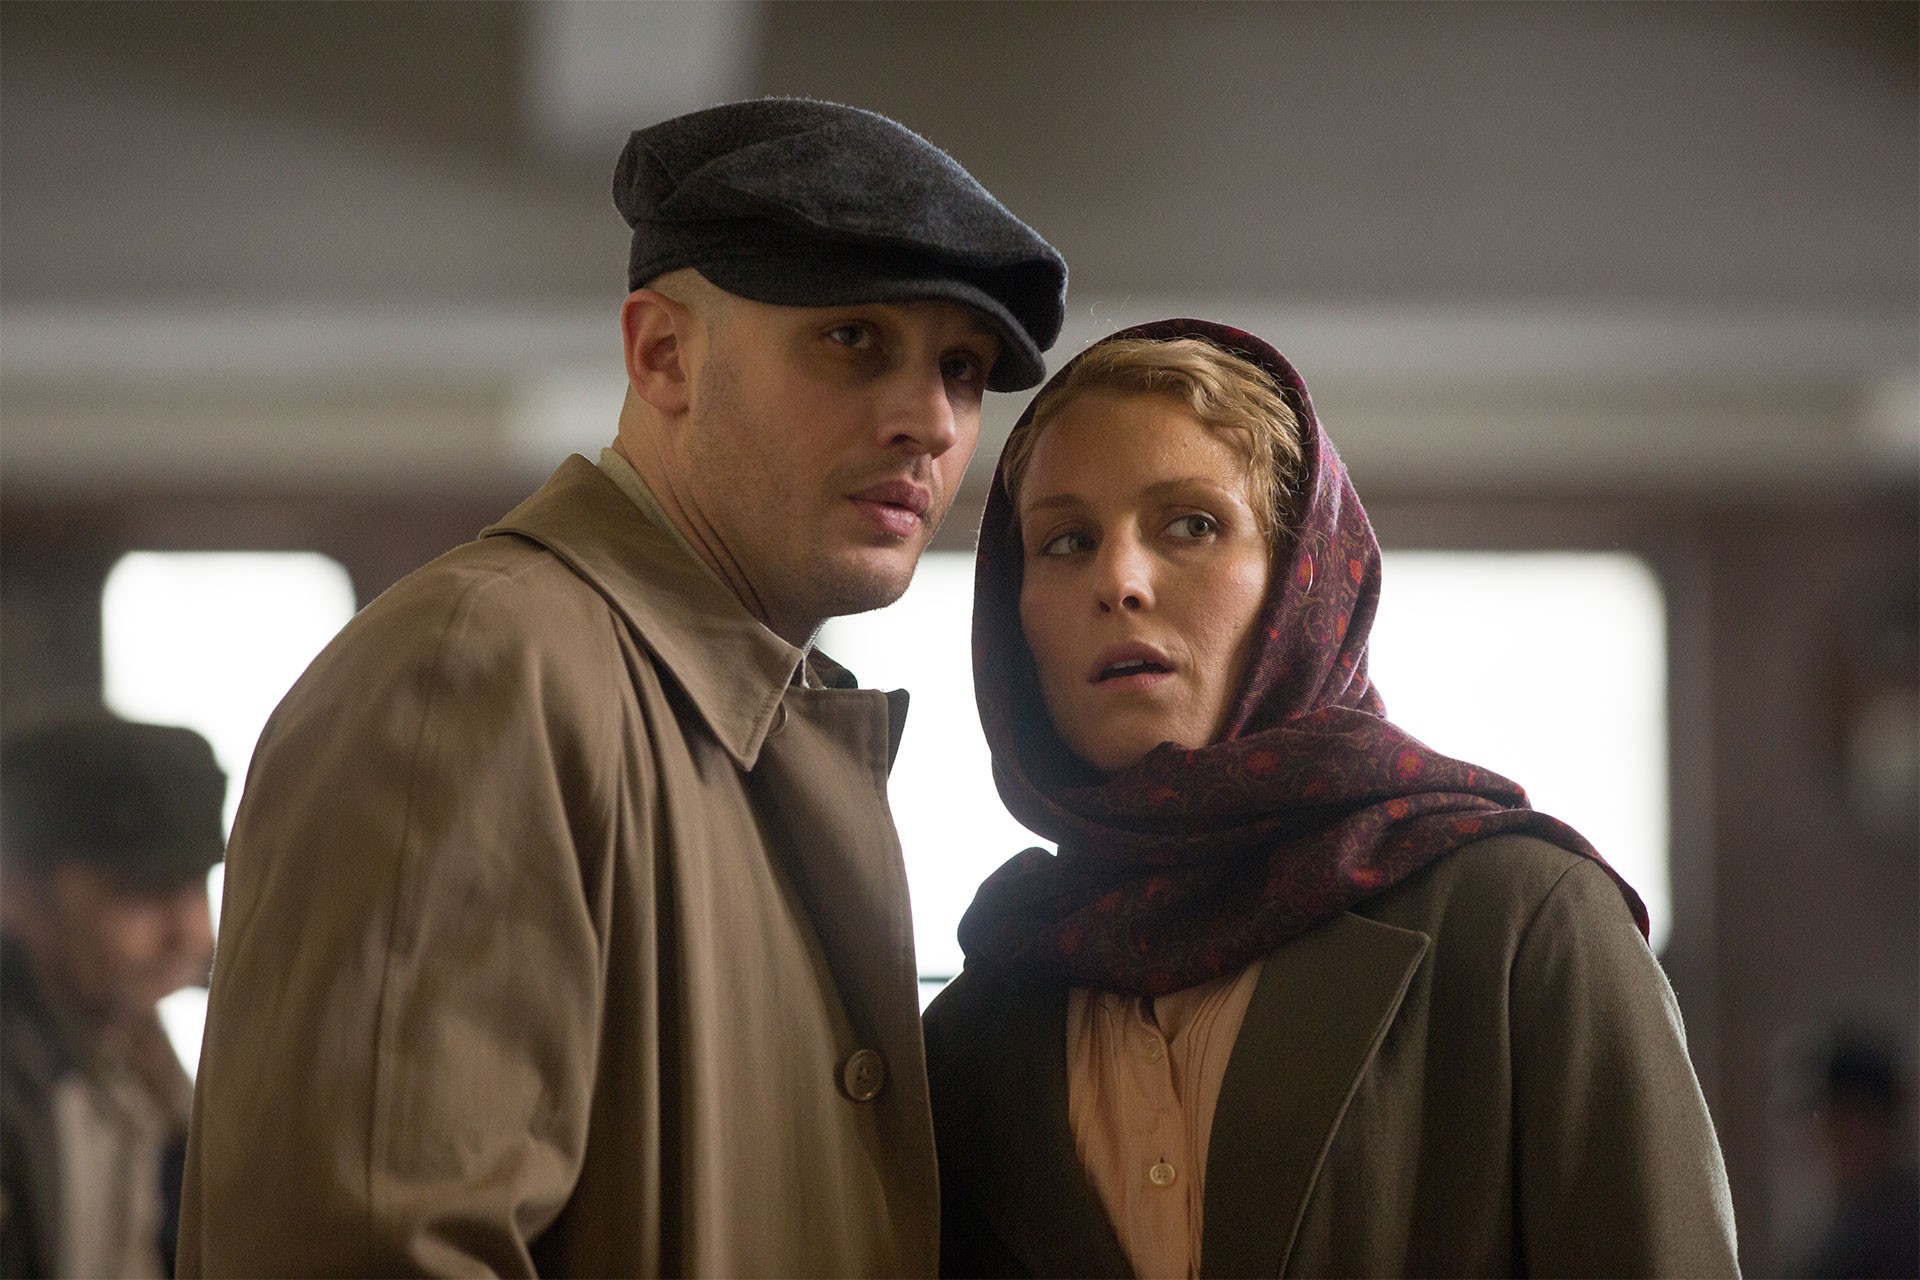 Tom Hardy stars as Leo Demidov and Noomi Rapace stars as Raisa Demidov in Summit Entertainment's Child 44 (2015). Photo credit by Larry Horricks.